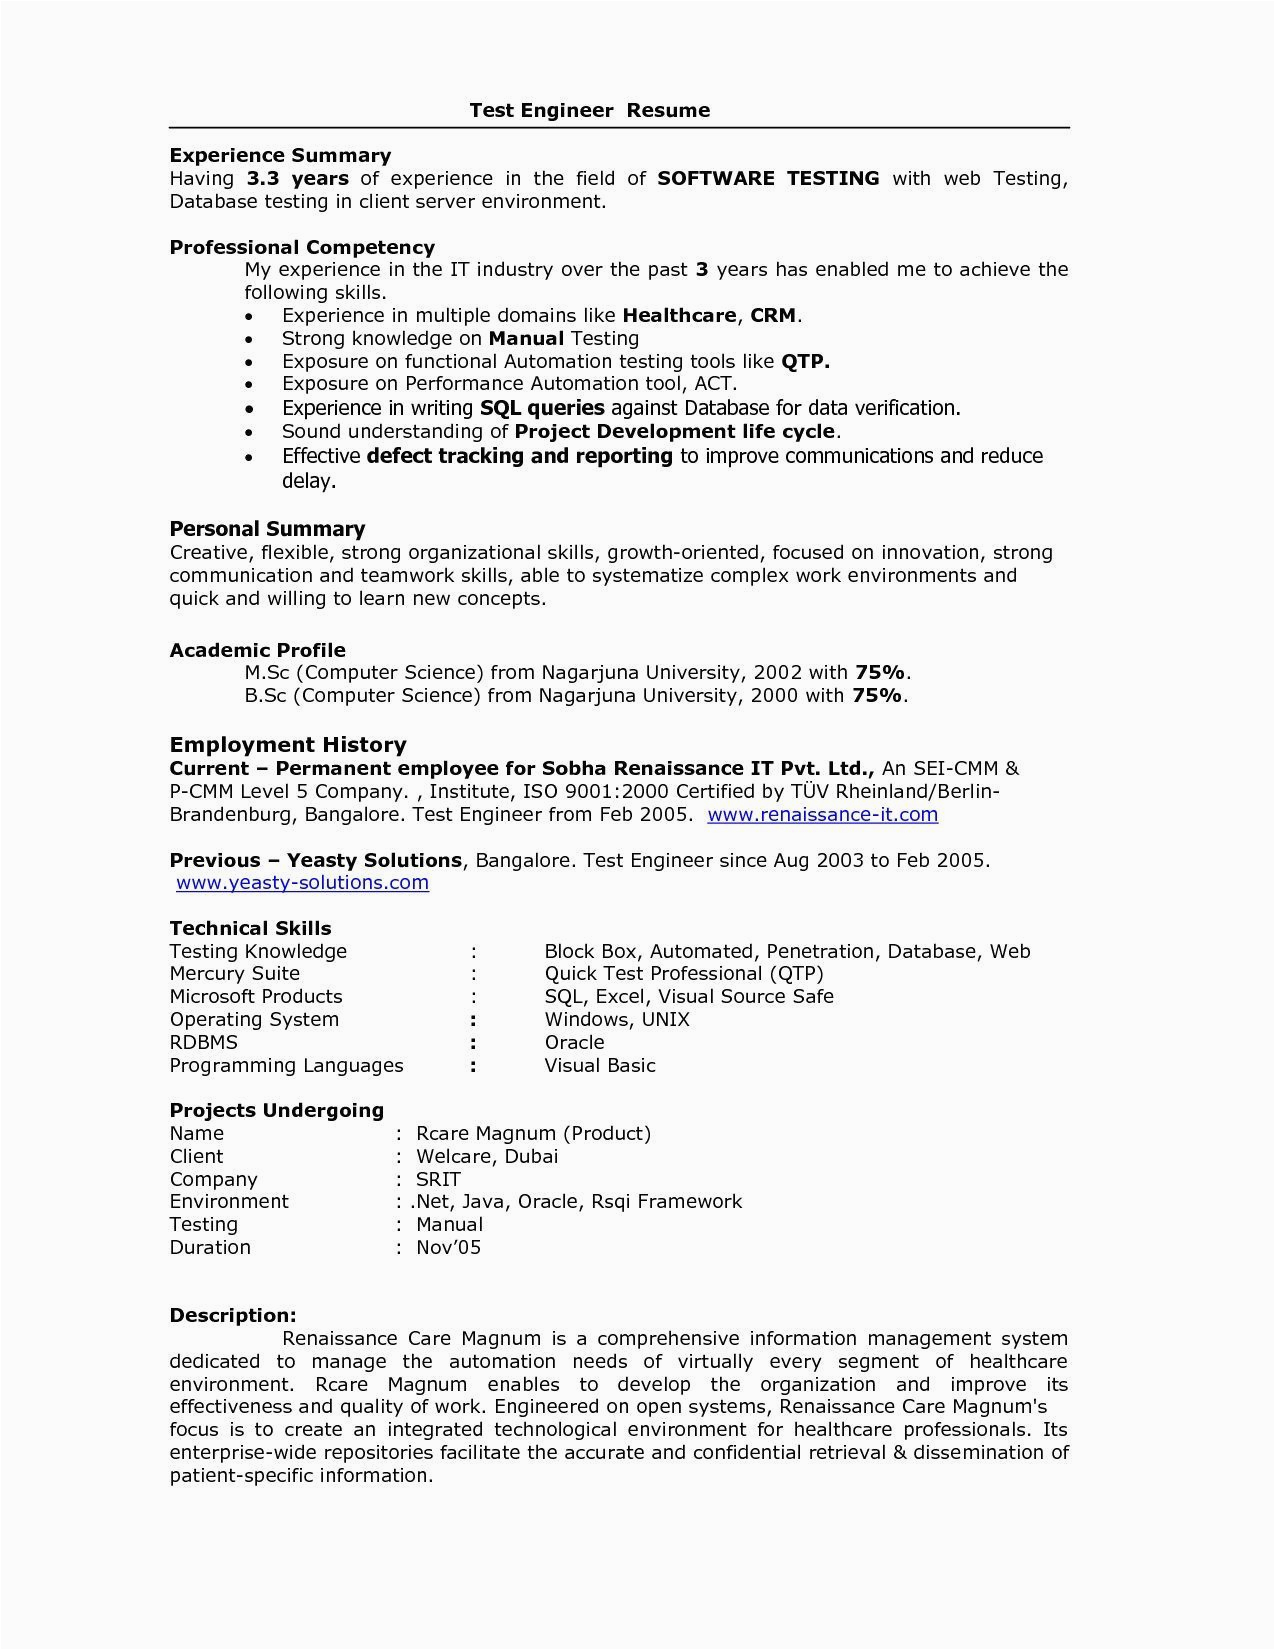 Sample Resume for software Tester 2 Years Experience Hr Resume Sample for 2 Years Experience Best Resume Examples